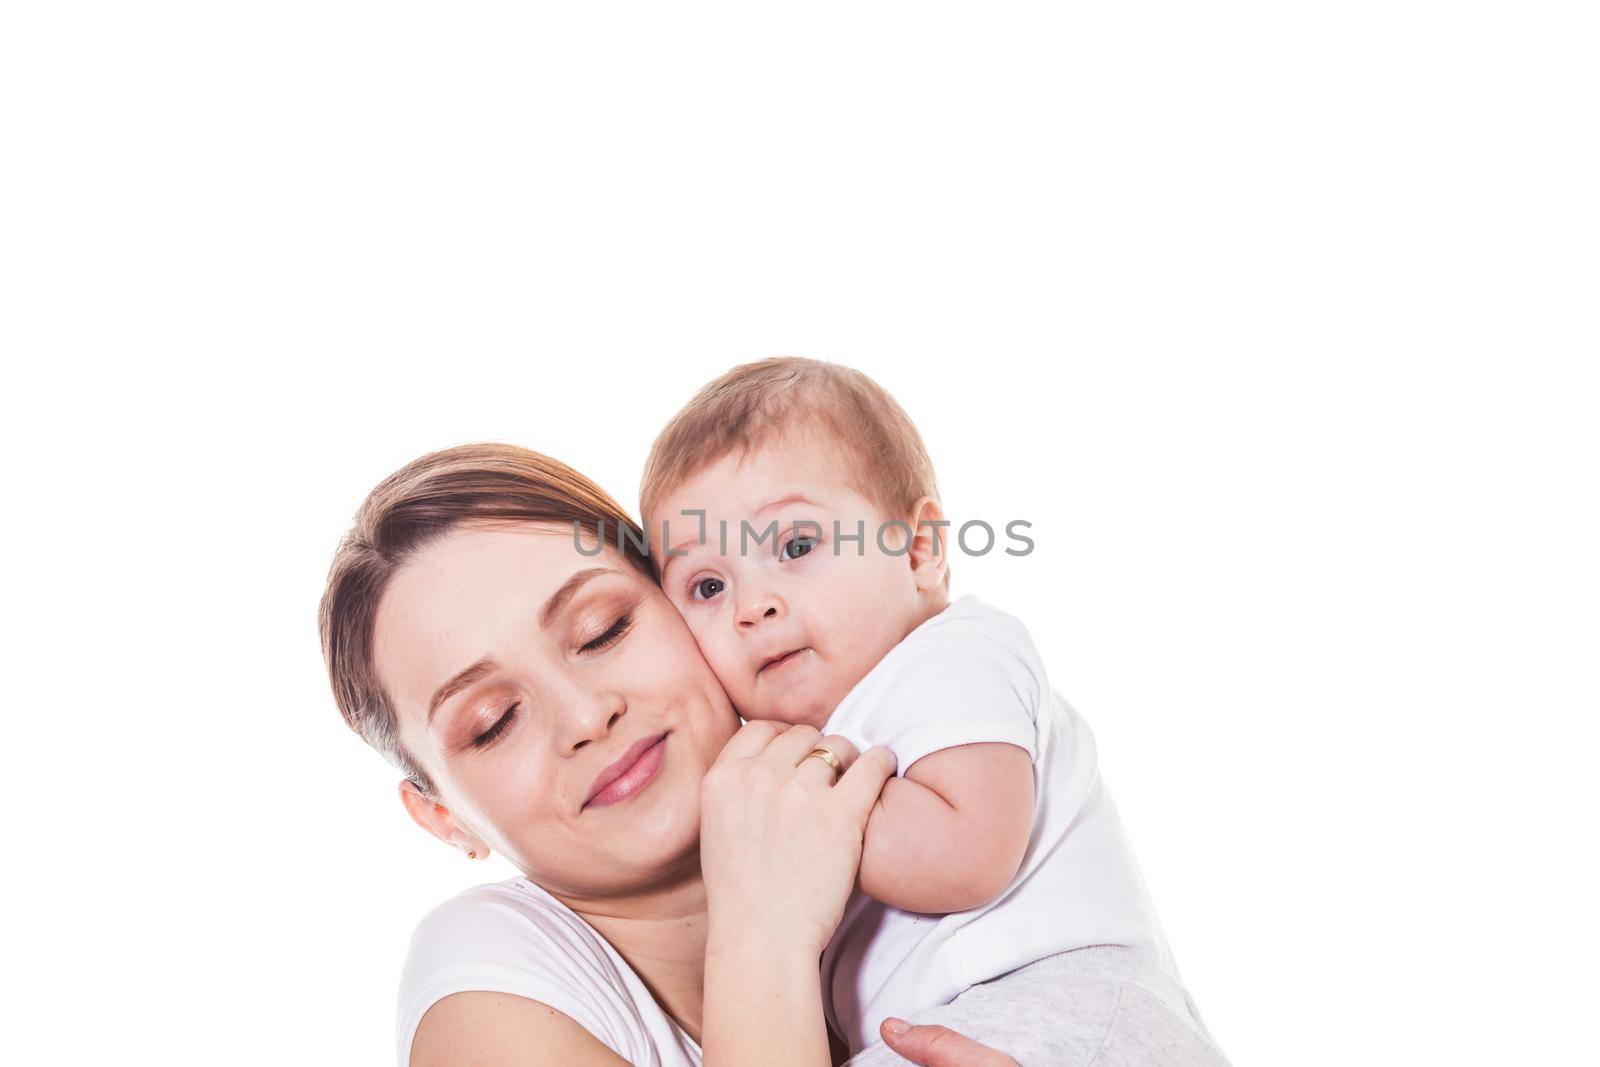 Portrait of happy mother and child embracing cheek to cheek on a white background. Mother with closed eyes holding baby's hand